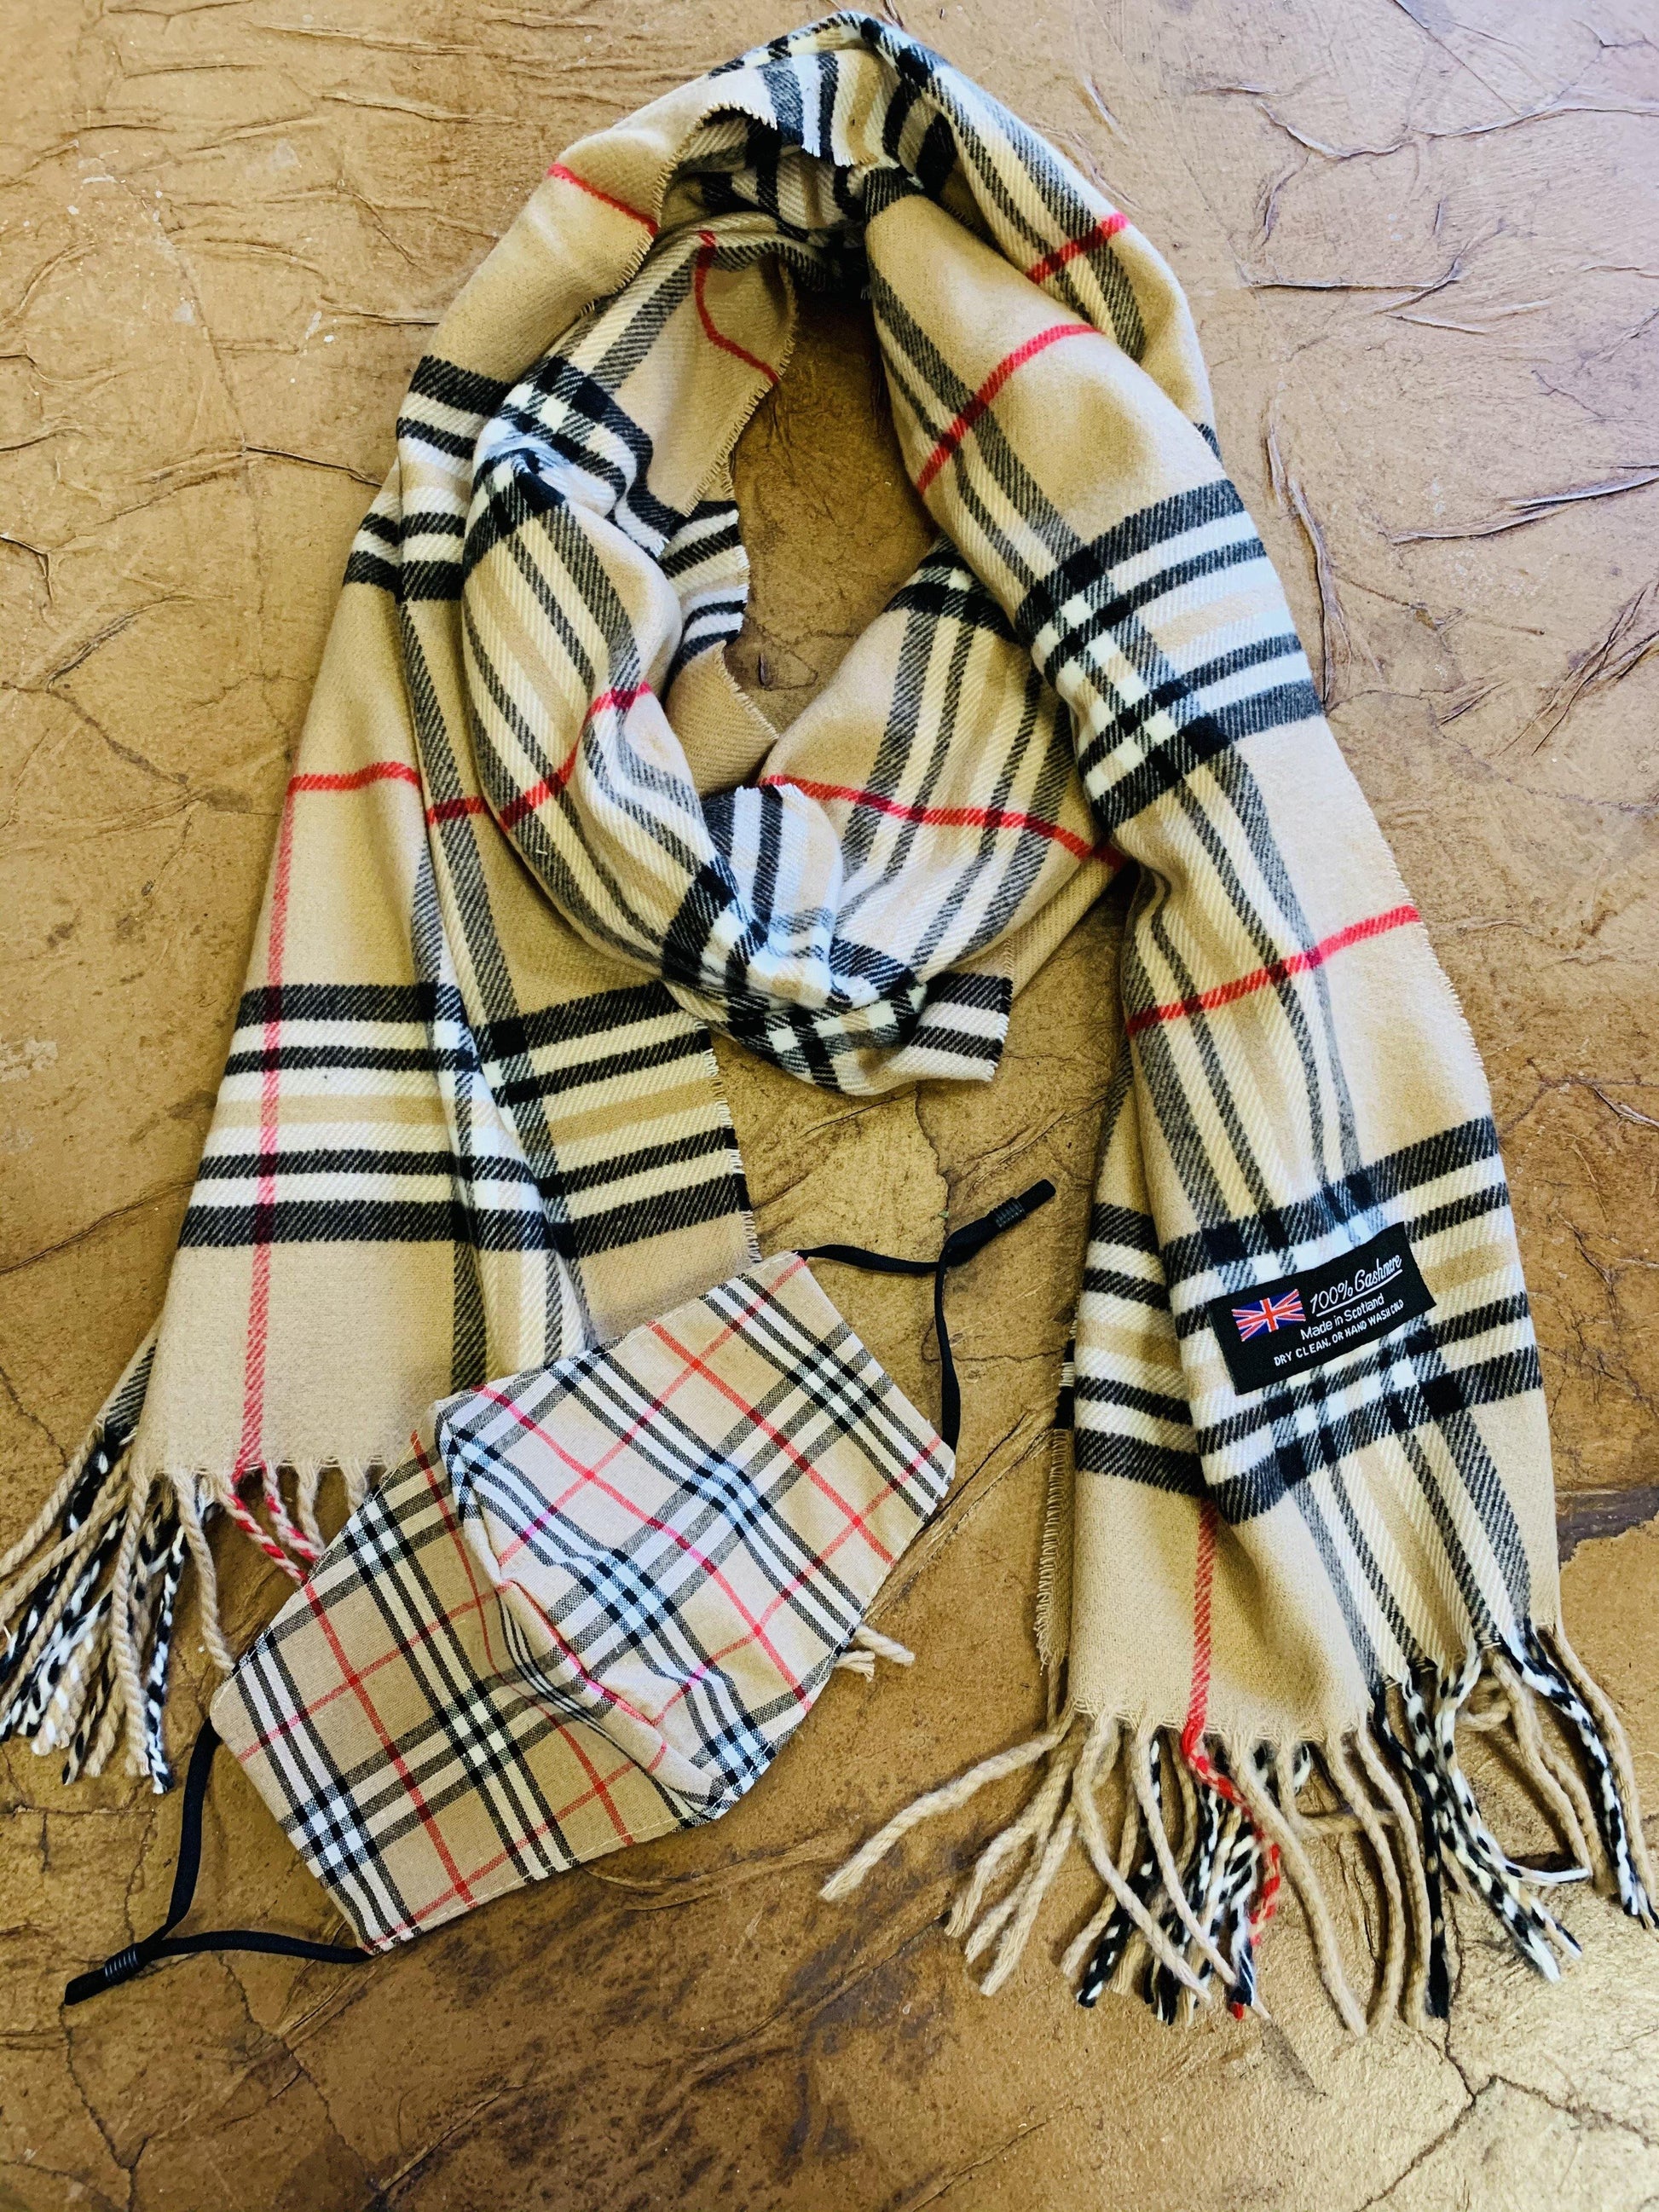 Burberry Vintage Check Fringed Cashmere Scarf in Black